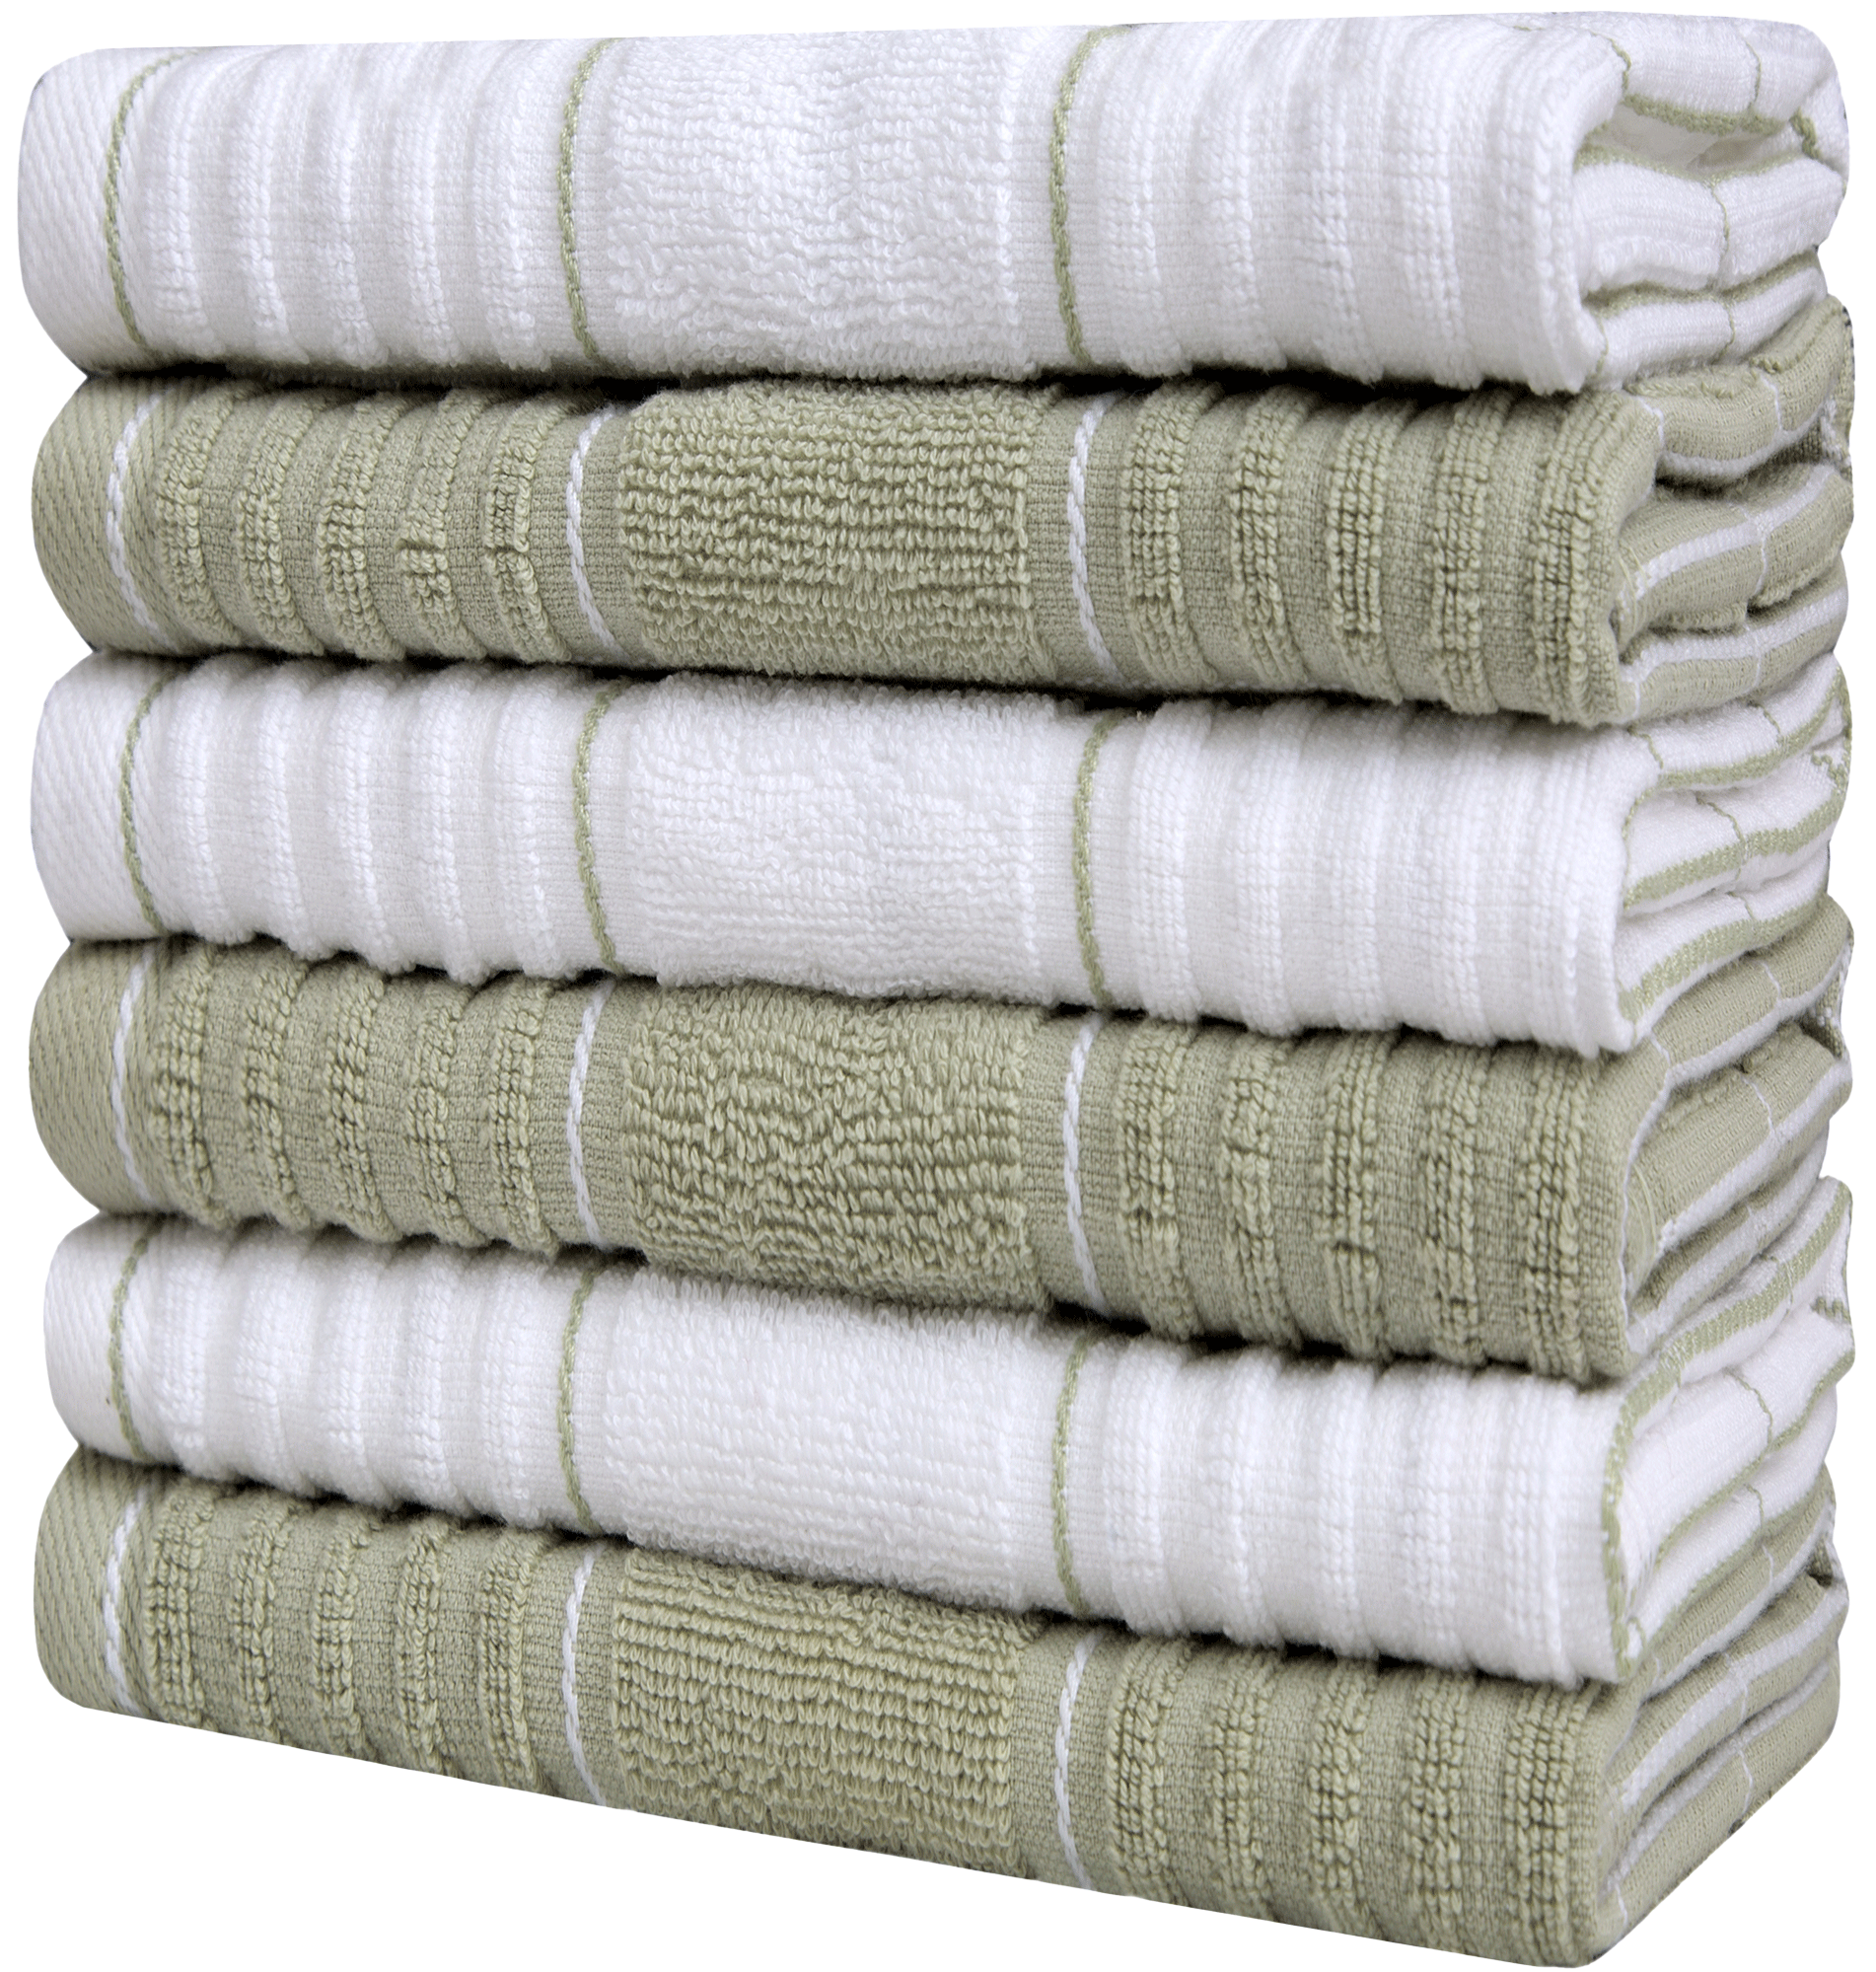 Bumble Kitchen Towels 16x 28 | Highly Absorbent Dish Towels with Hanging  Loop | Natural Ring Spun Cotton, 380 GSM | Gray Check Design - 6 Pack